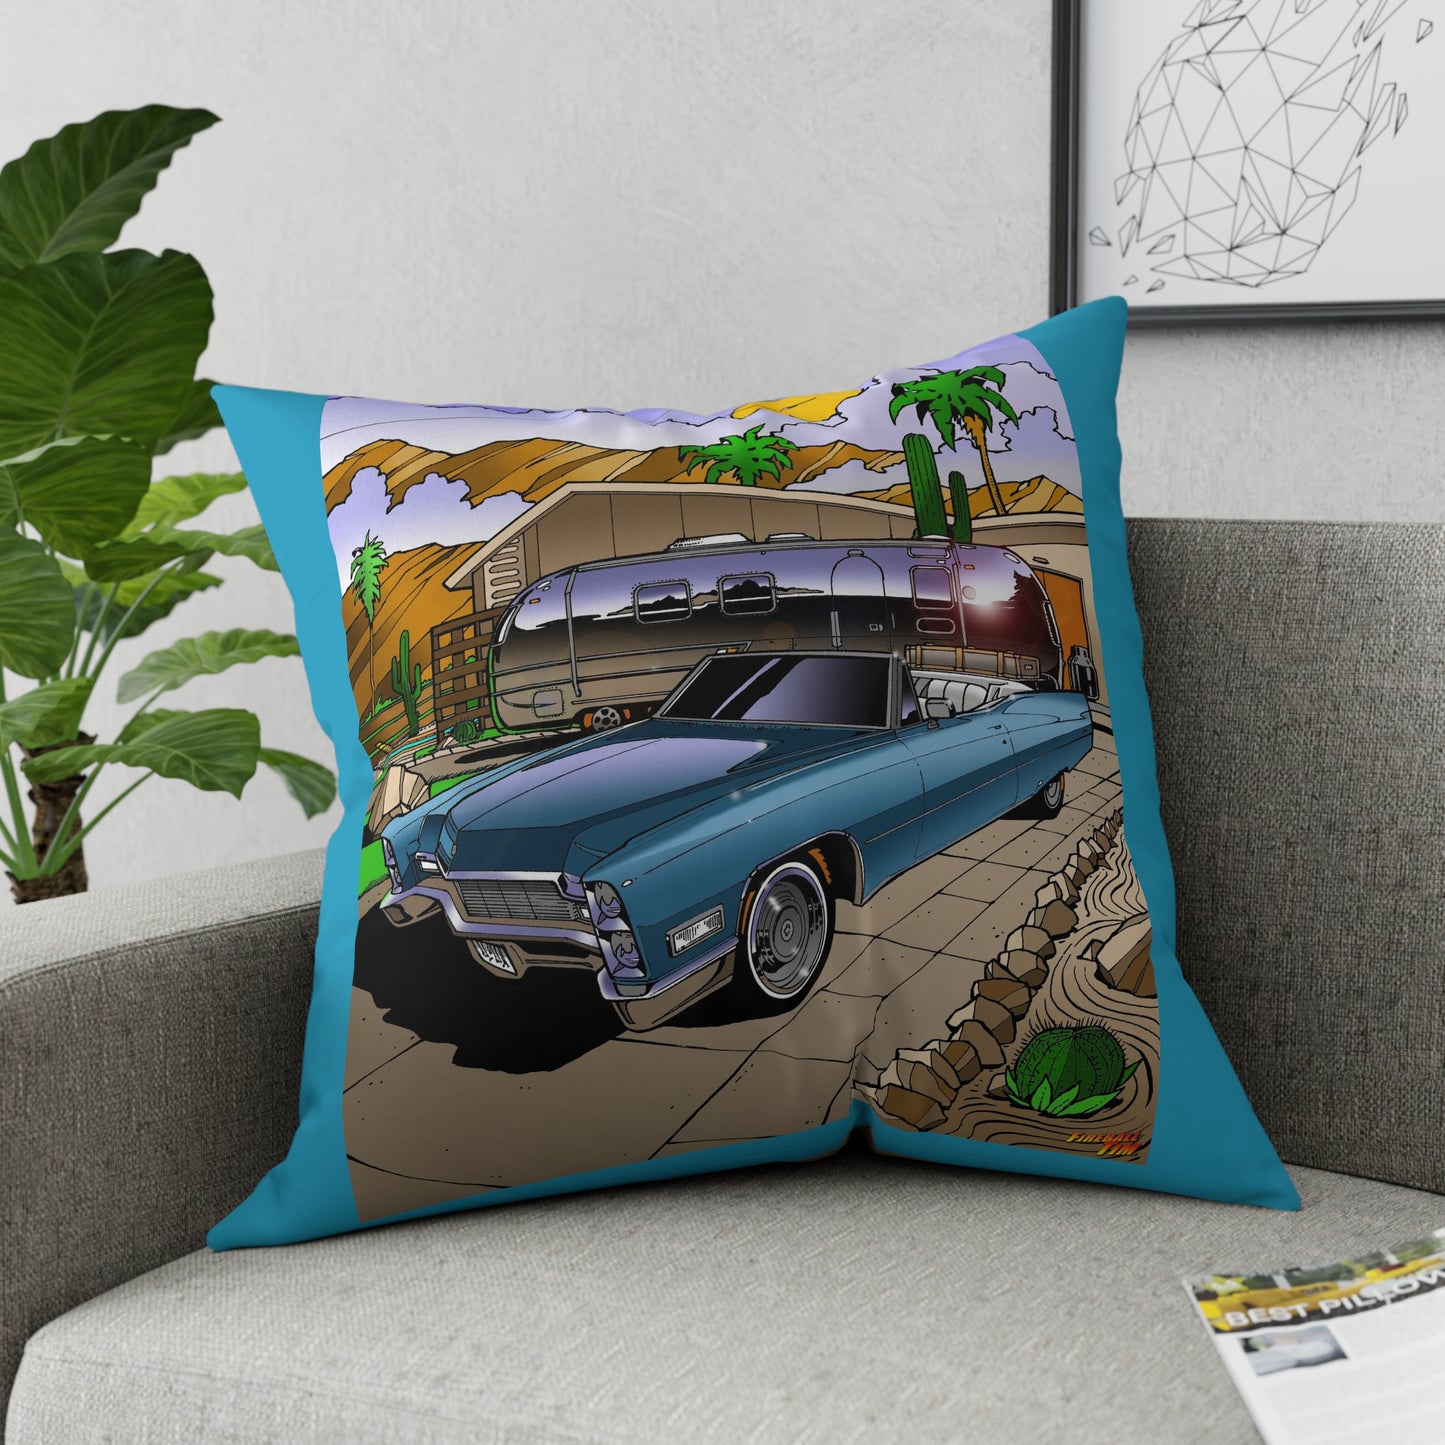 CADILLAC 1968 Vintage Airstream Trailer Broadcloth Pillow 4 Sizes